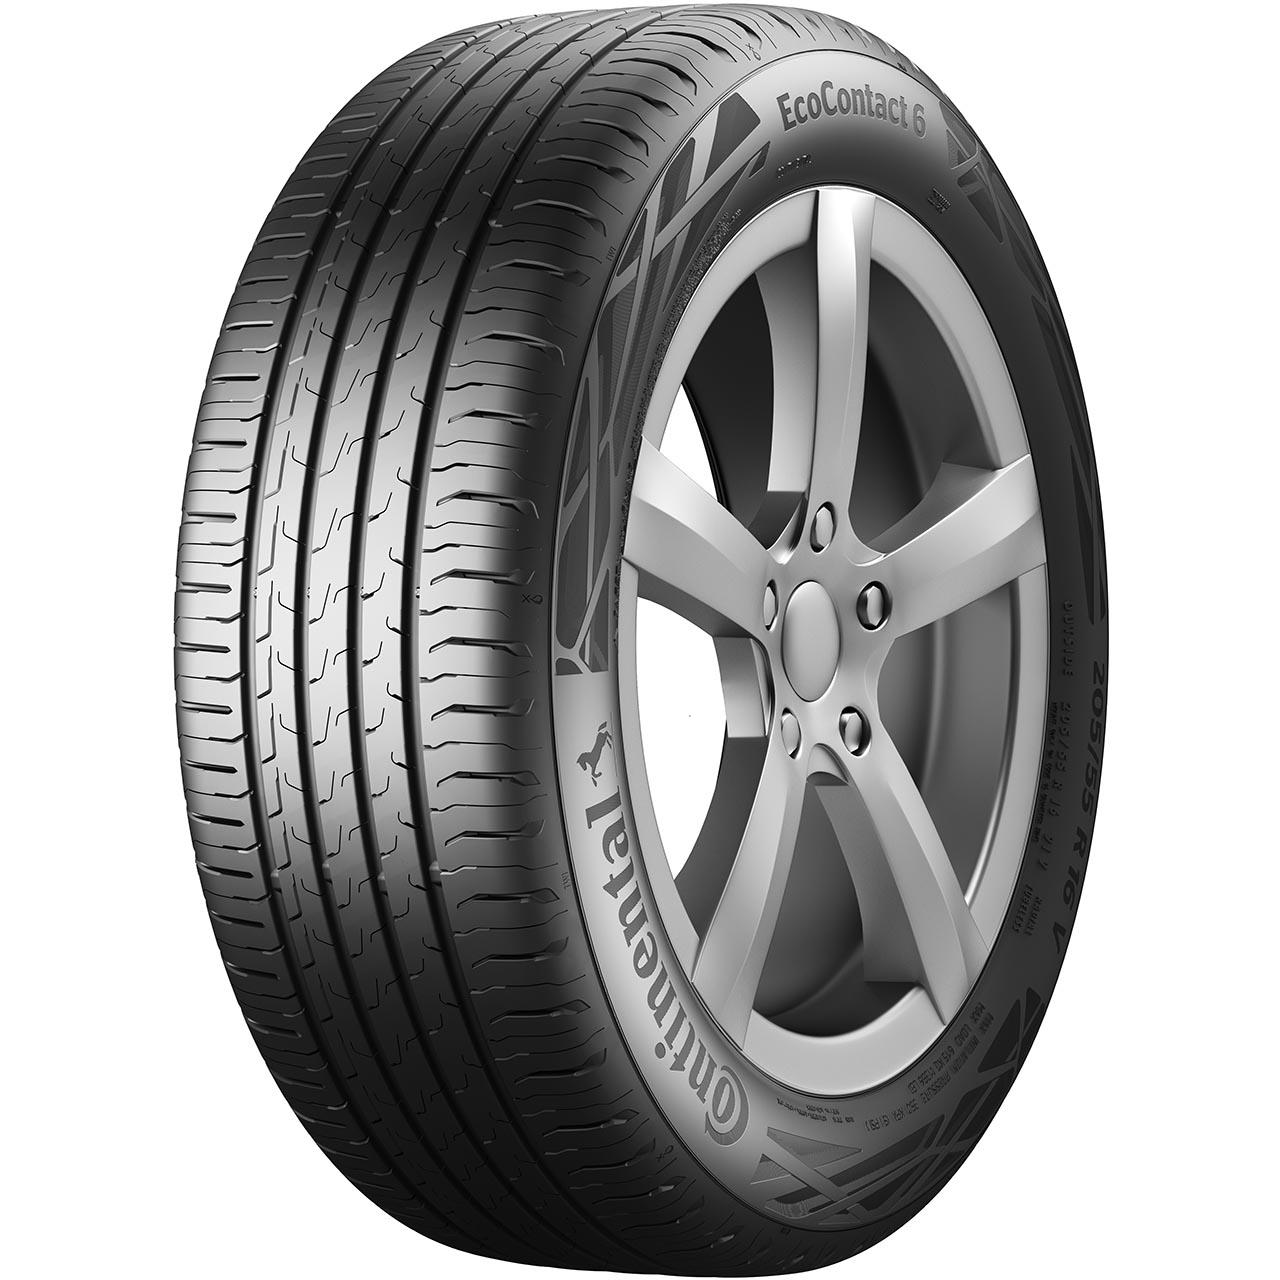 CONTINENTAL ECOCONTACT 6 OPE 185/65 R15 88H  TL